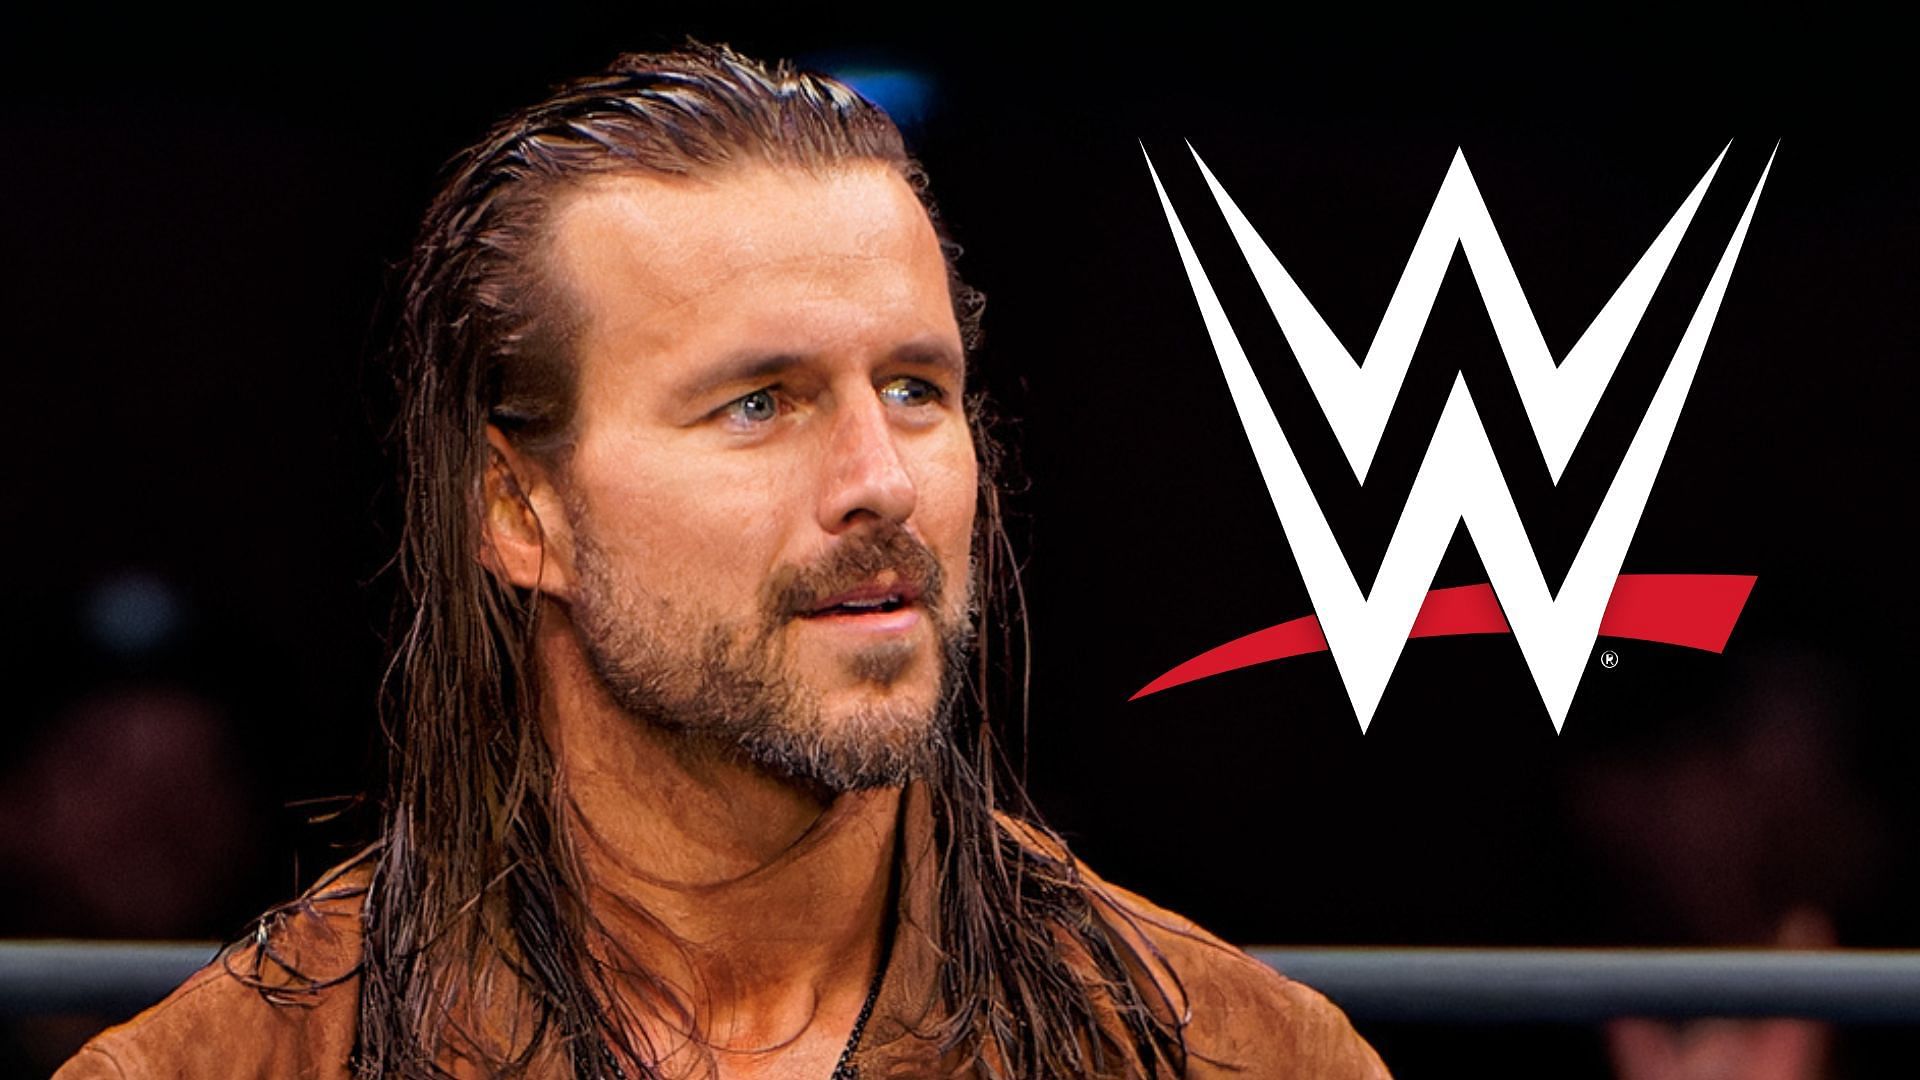 Which WWE legend did Adam Cole know he would feud with?